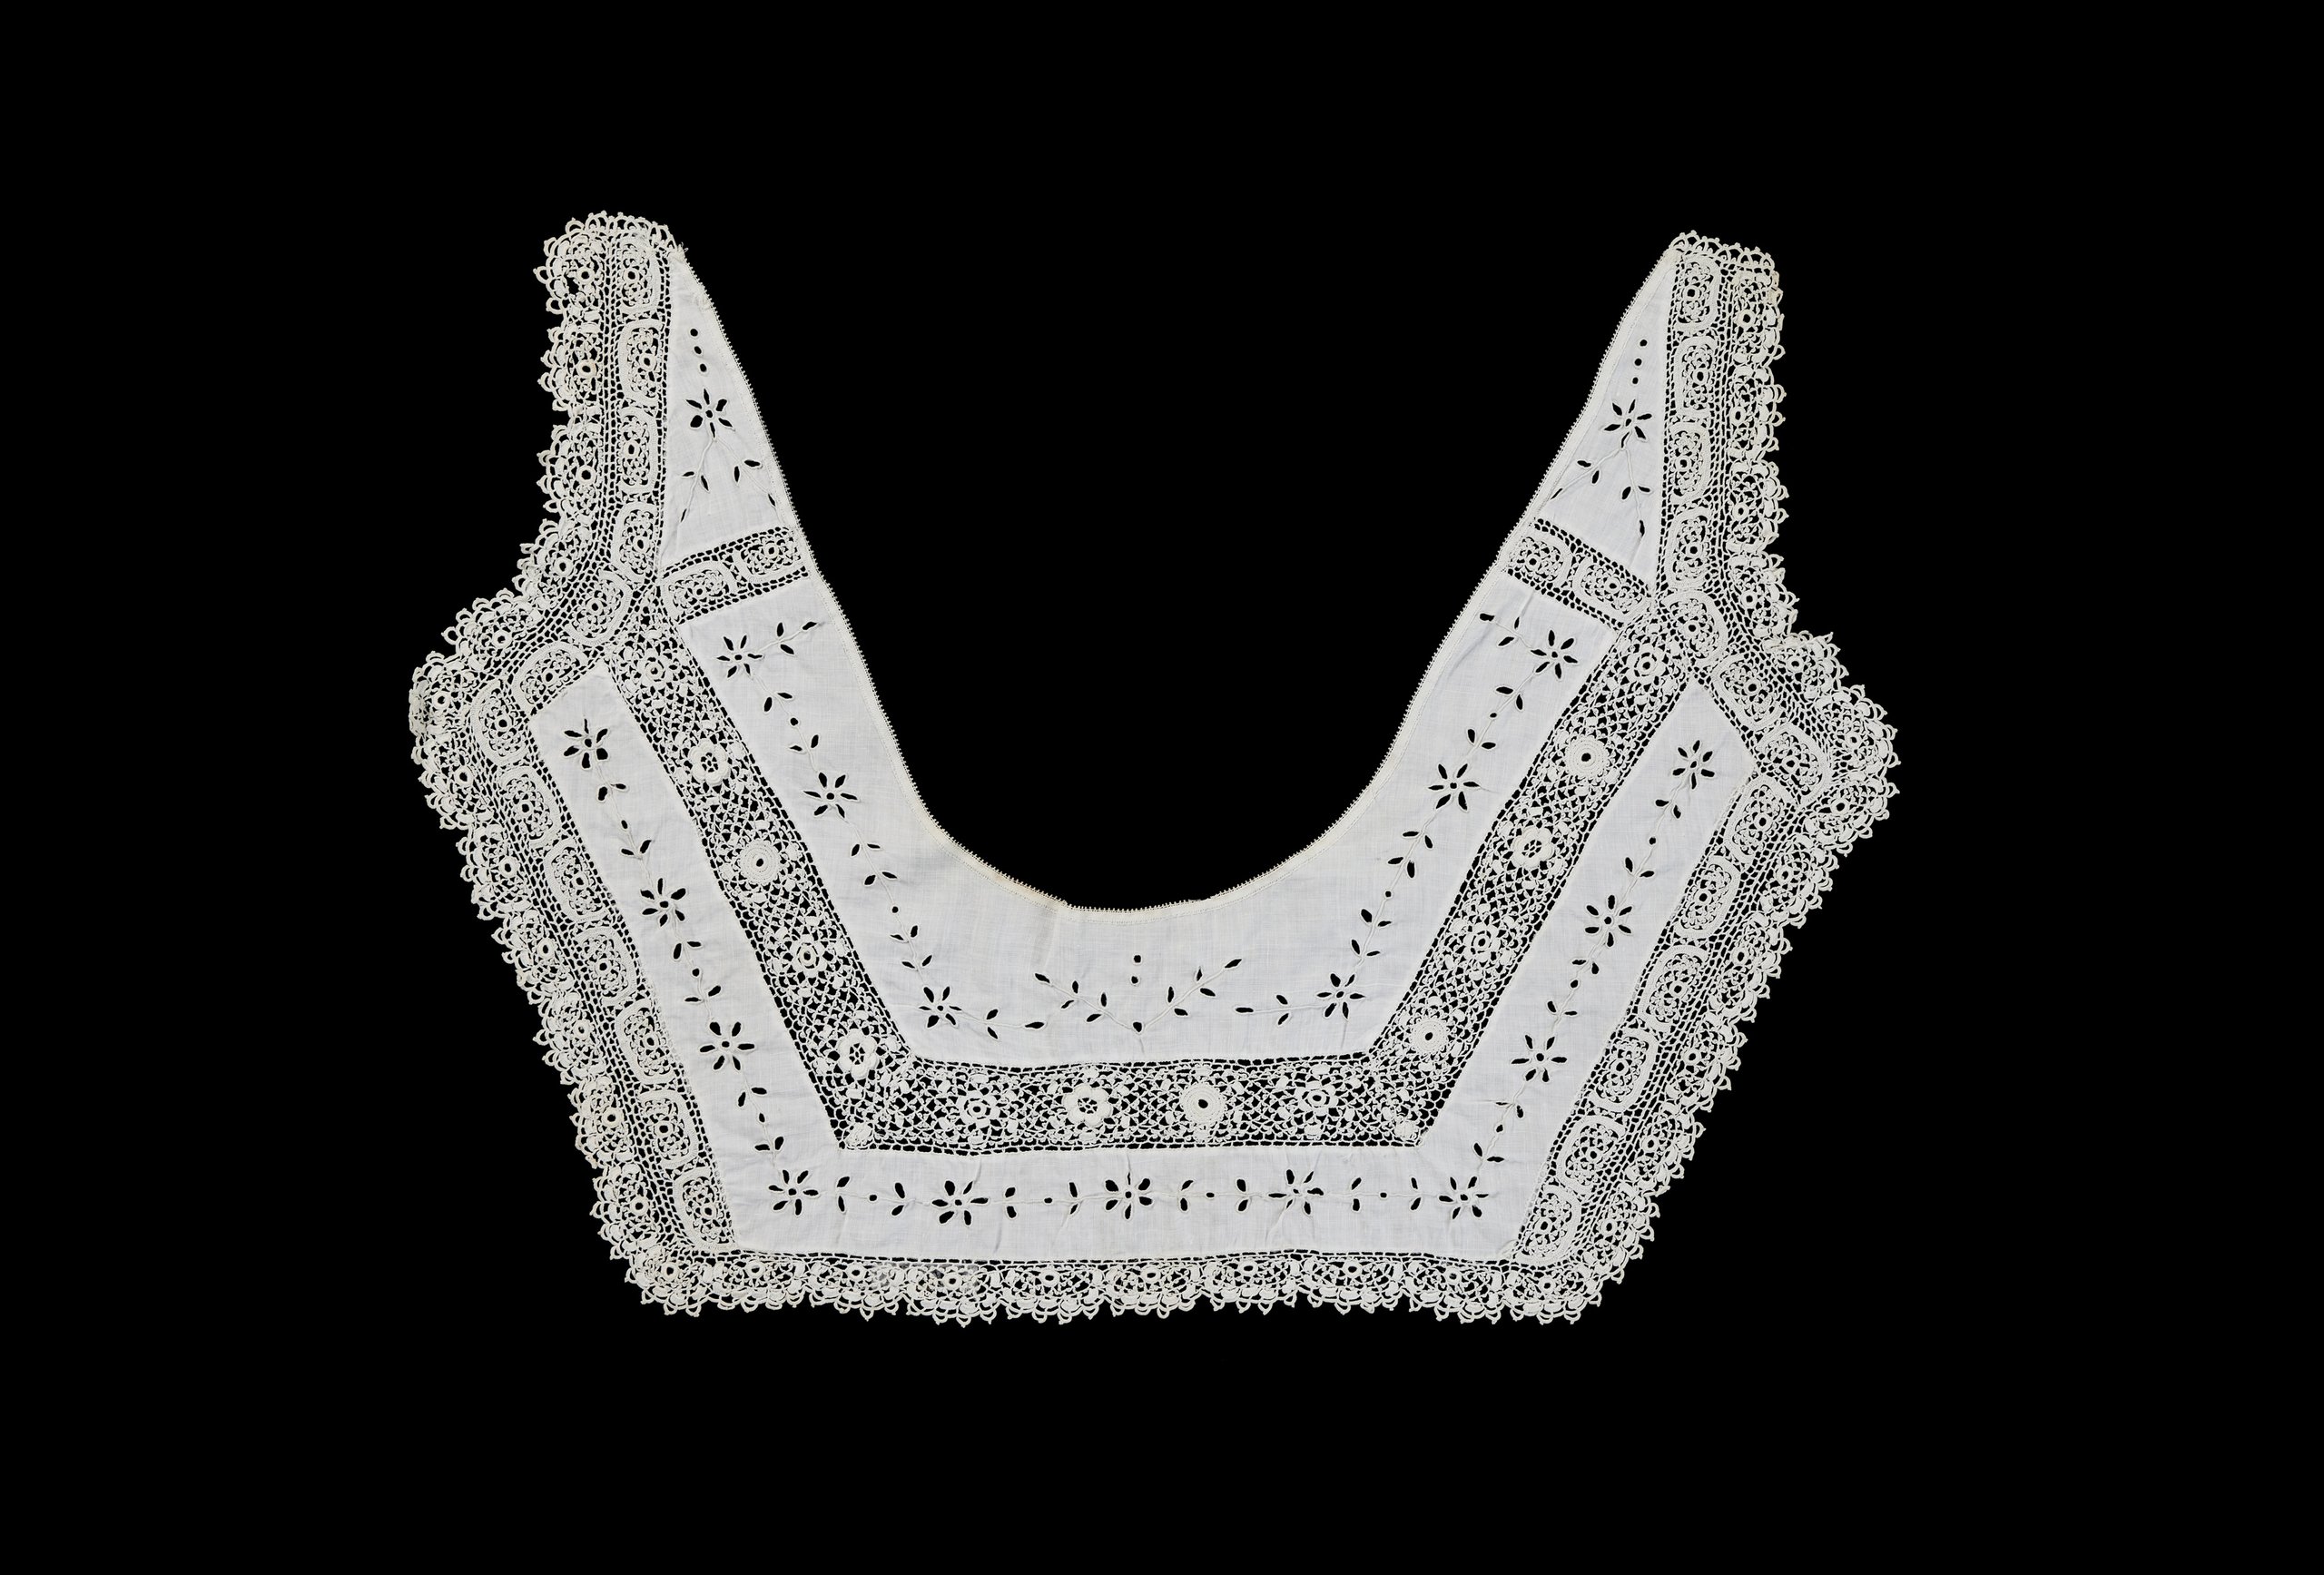 Powerhouse Collection - Lace collar by Edith Mary Lester